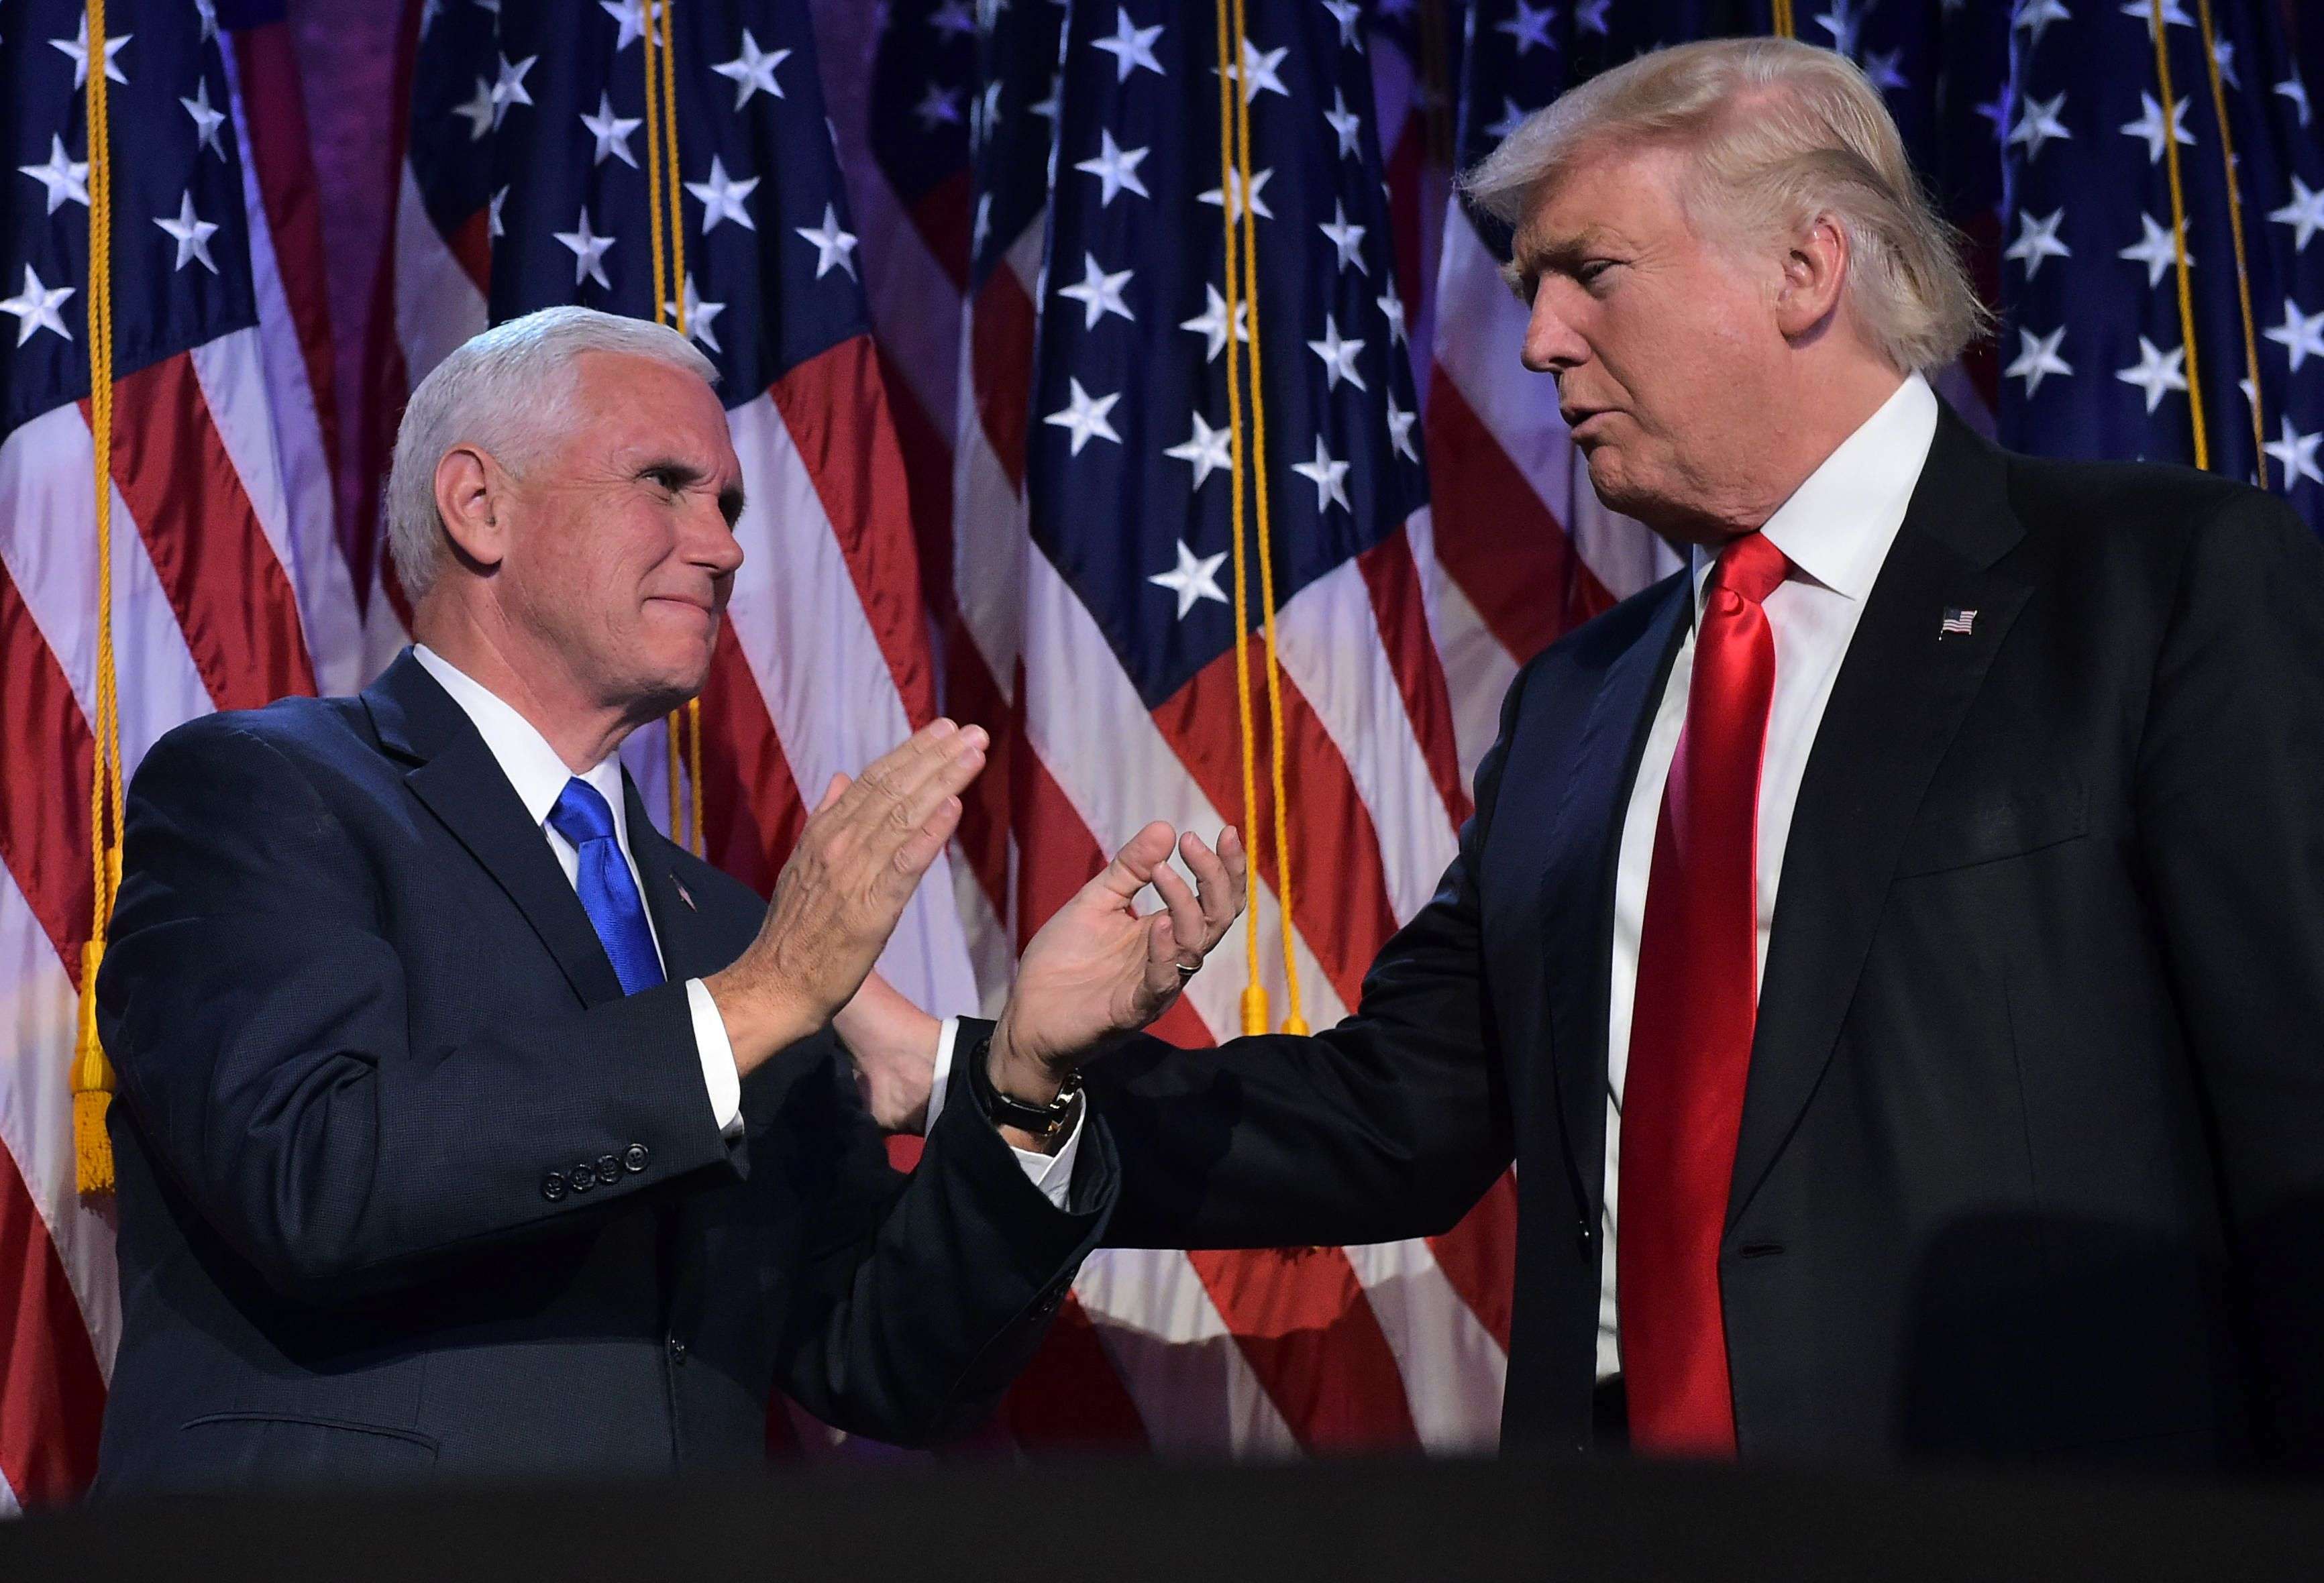 This file photo taken on November 9 shows Republican presidential elect Donald Trump and Vice President elect Mike Pence during election night at the New York Hilton Midtown in New York. Photo: AFP